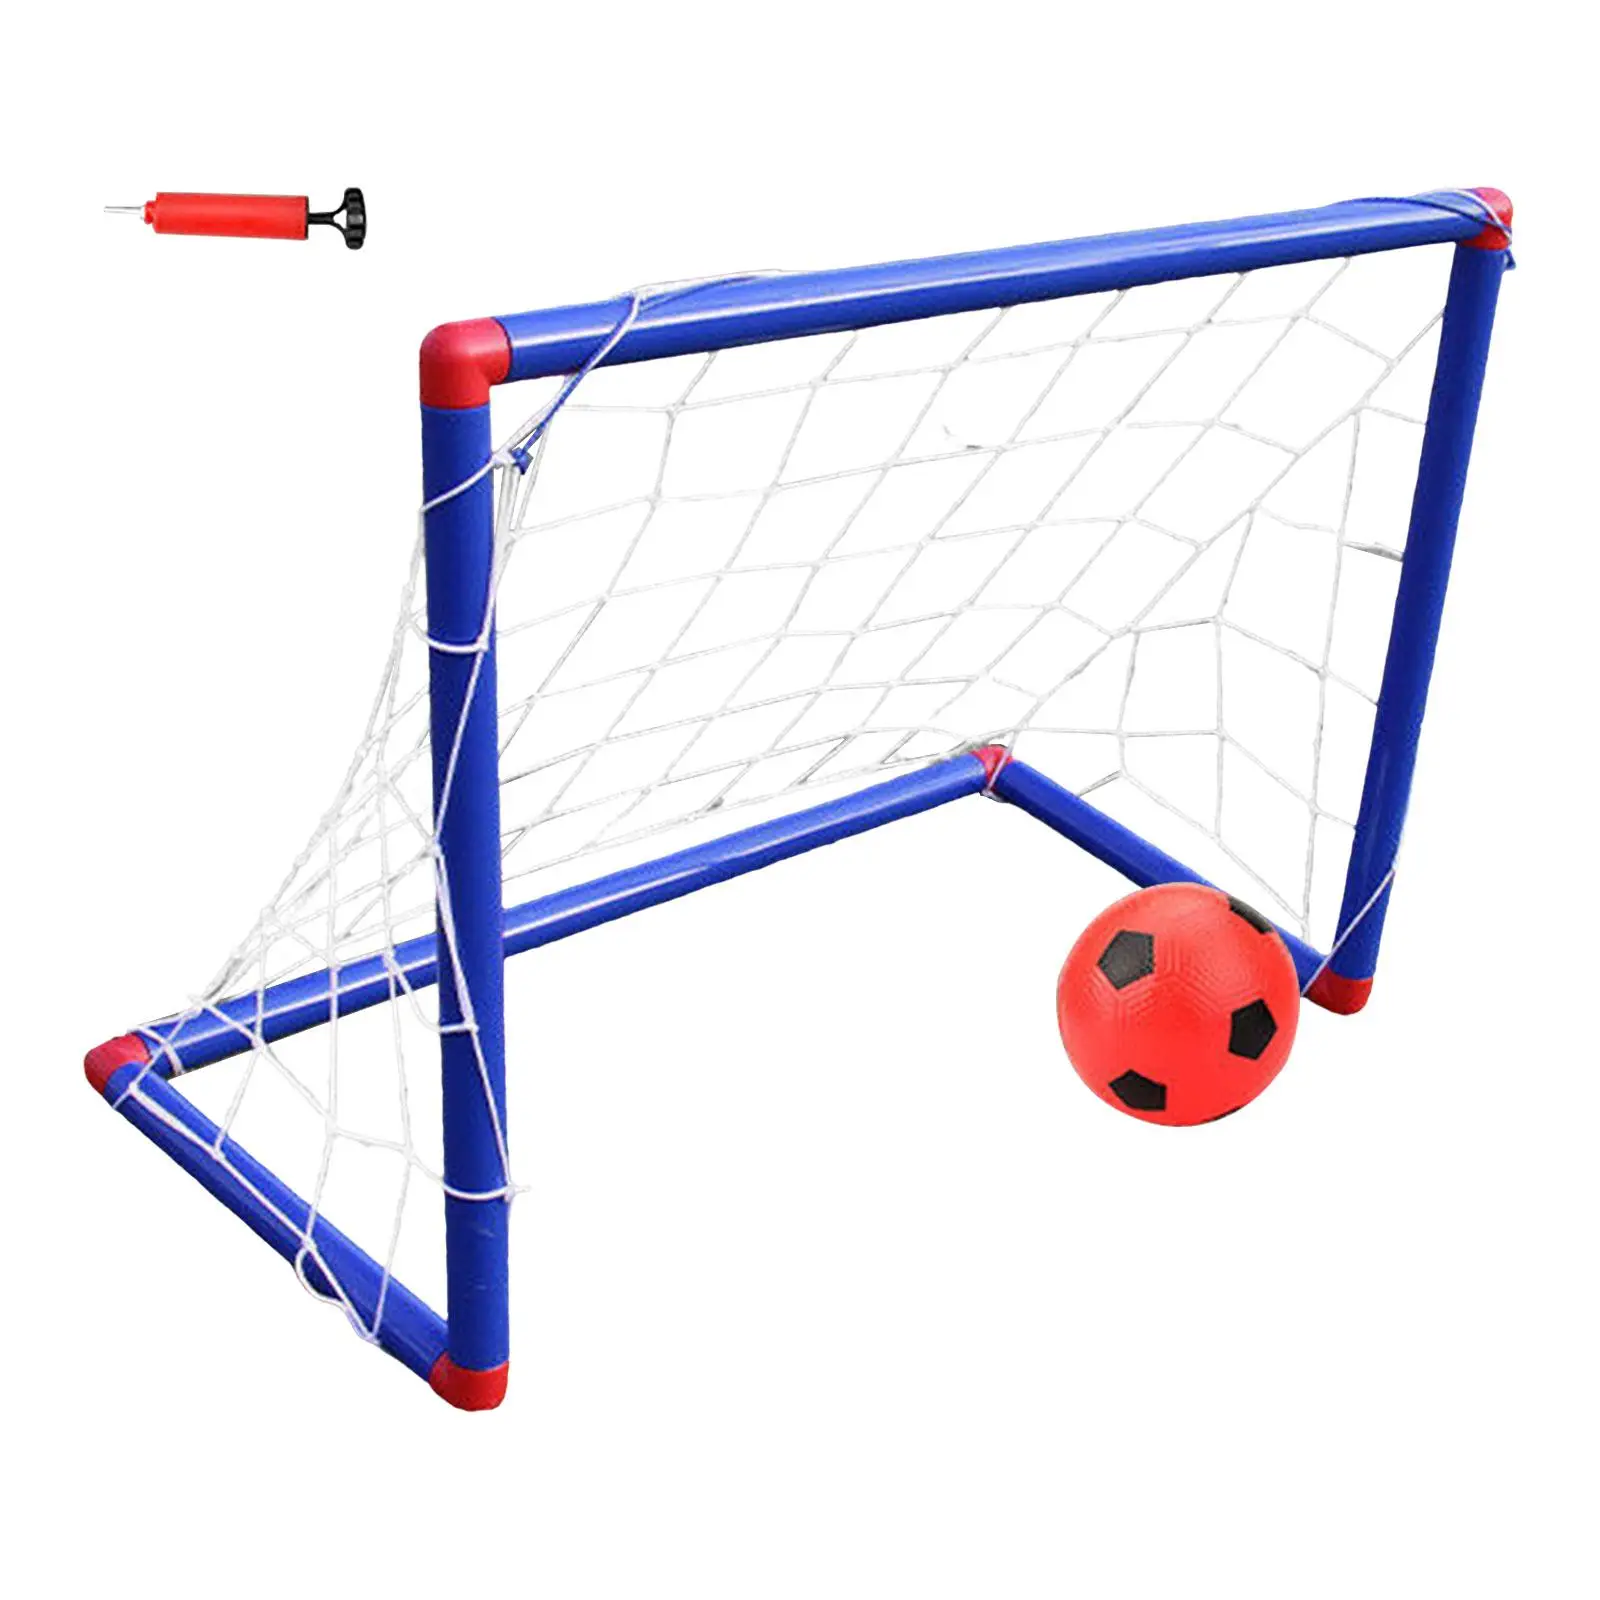 Soccer Goal Sets for Kids Soccer Goal Post Net and Ball for Backyard Football Goals for Indoor Outdoor Playground Training Gifts